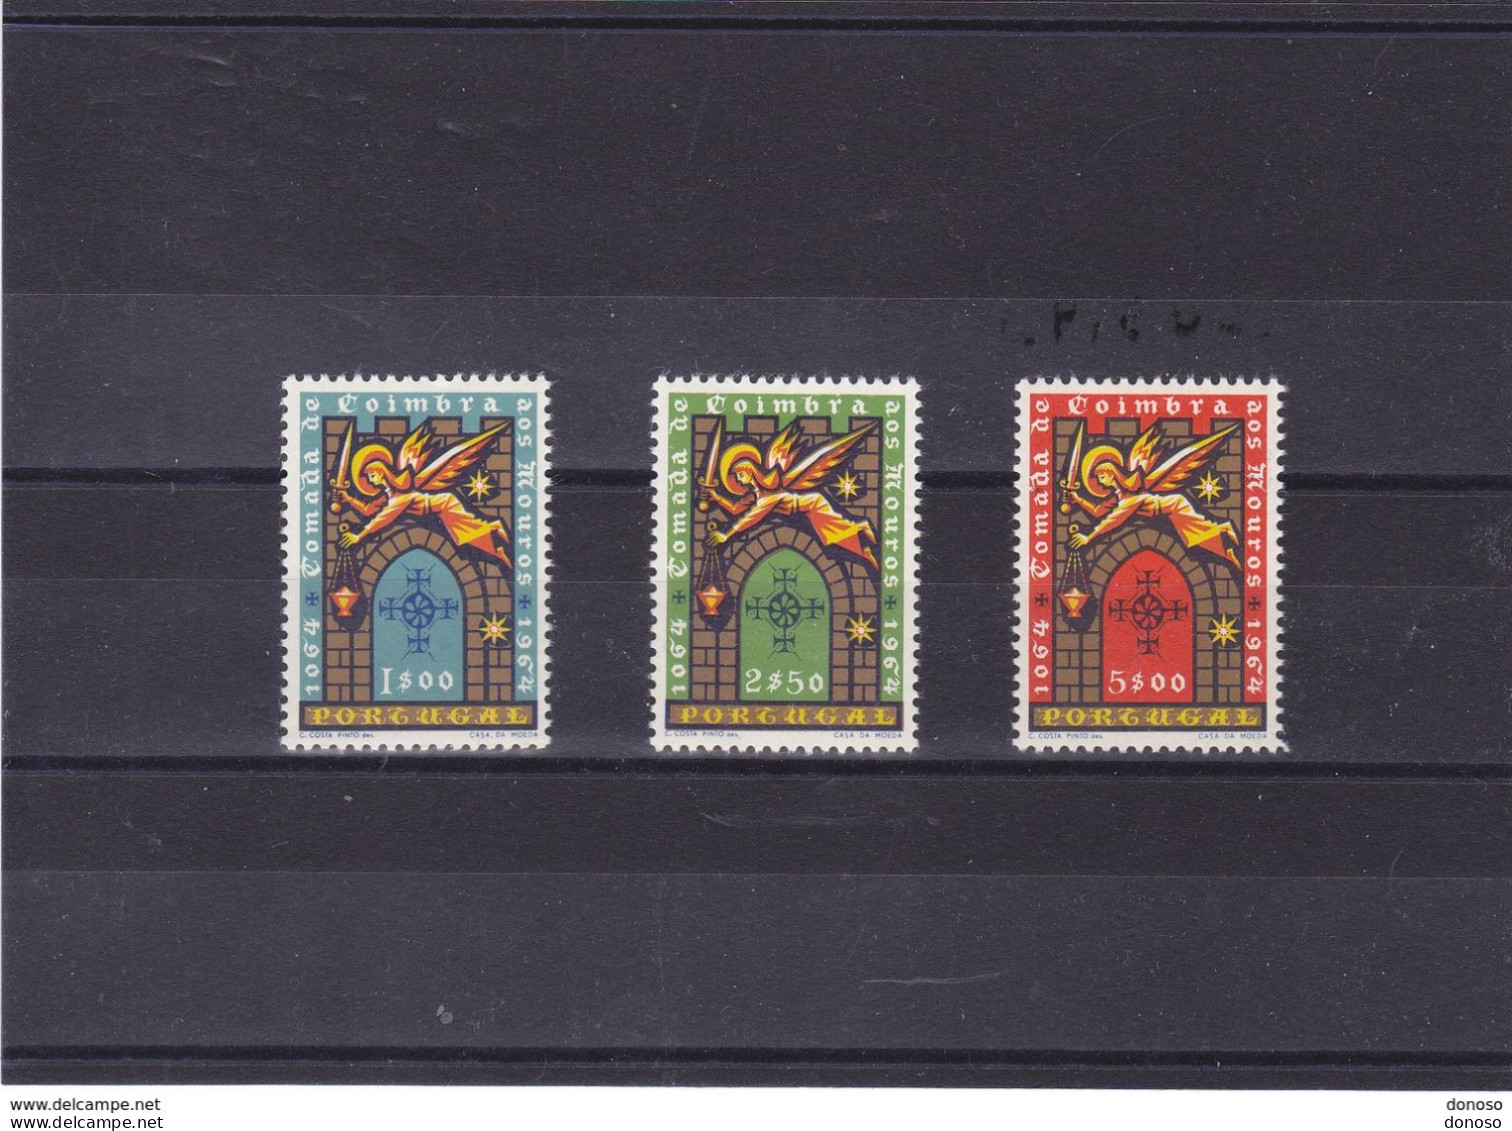 PORTUGAL 1965 COIMBRA Yvert 960-962, Michel 979-981 NEUF** MNH Cote Yv 6 Euros - Unused Stamps